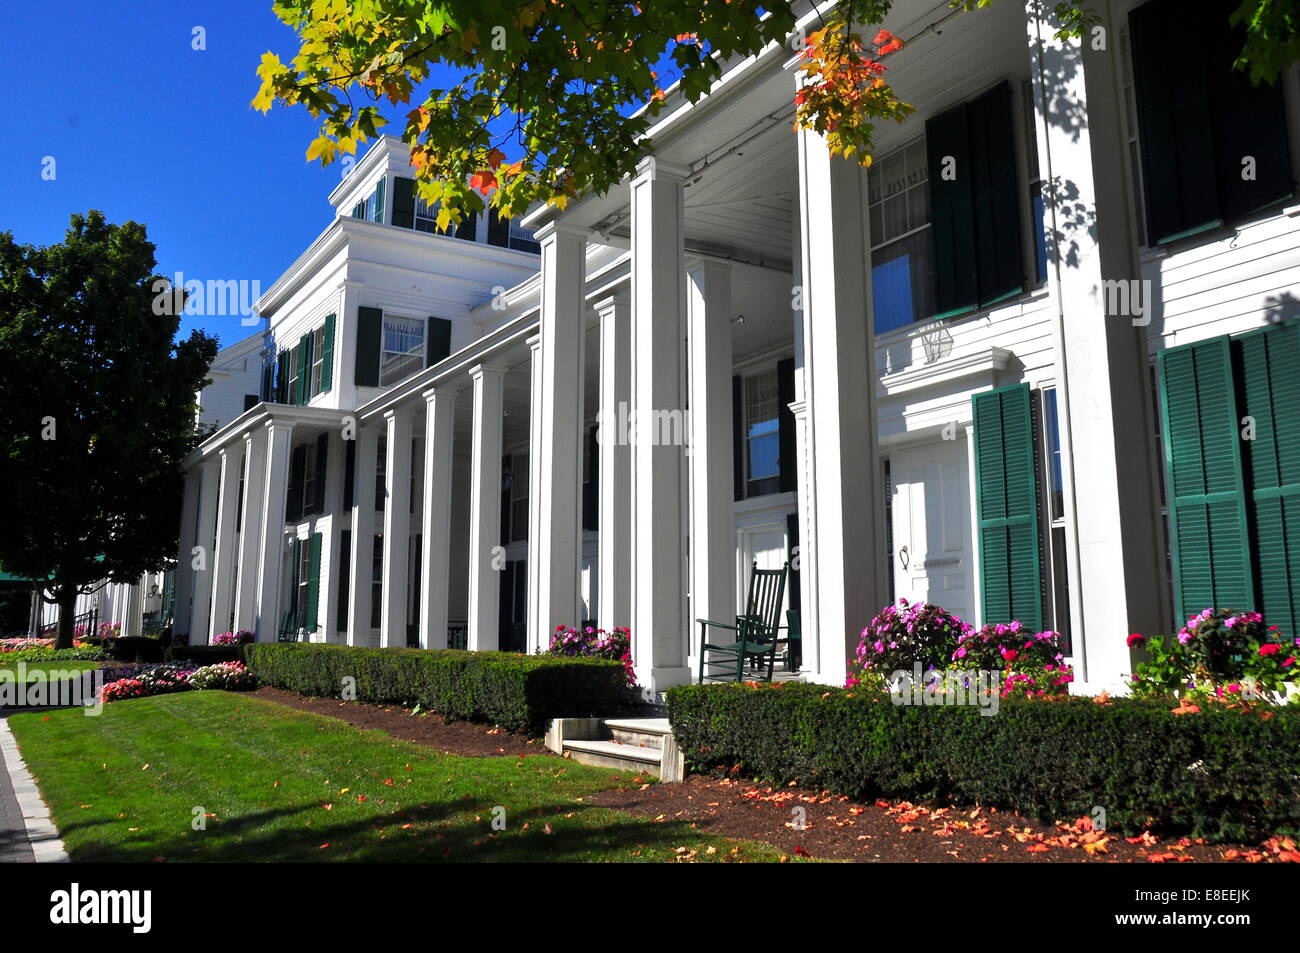 Manchester Village, Vermont:  The Greek Revival luxury Equinox Hotel and Resort is a village landmark established in 1769 * Stock Photo